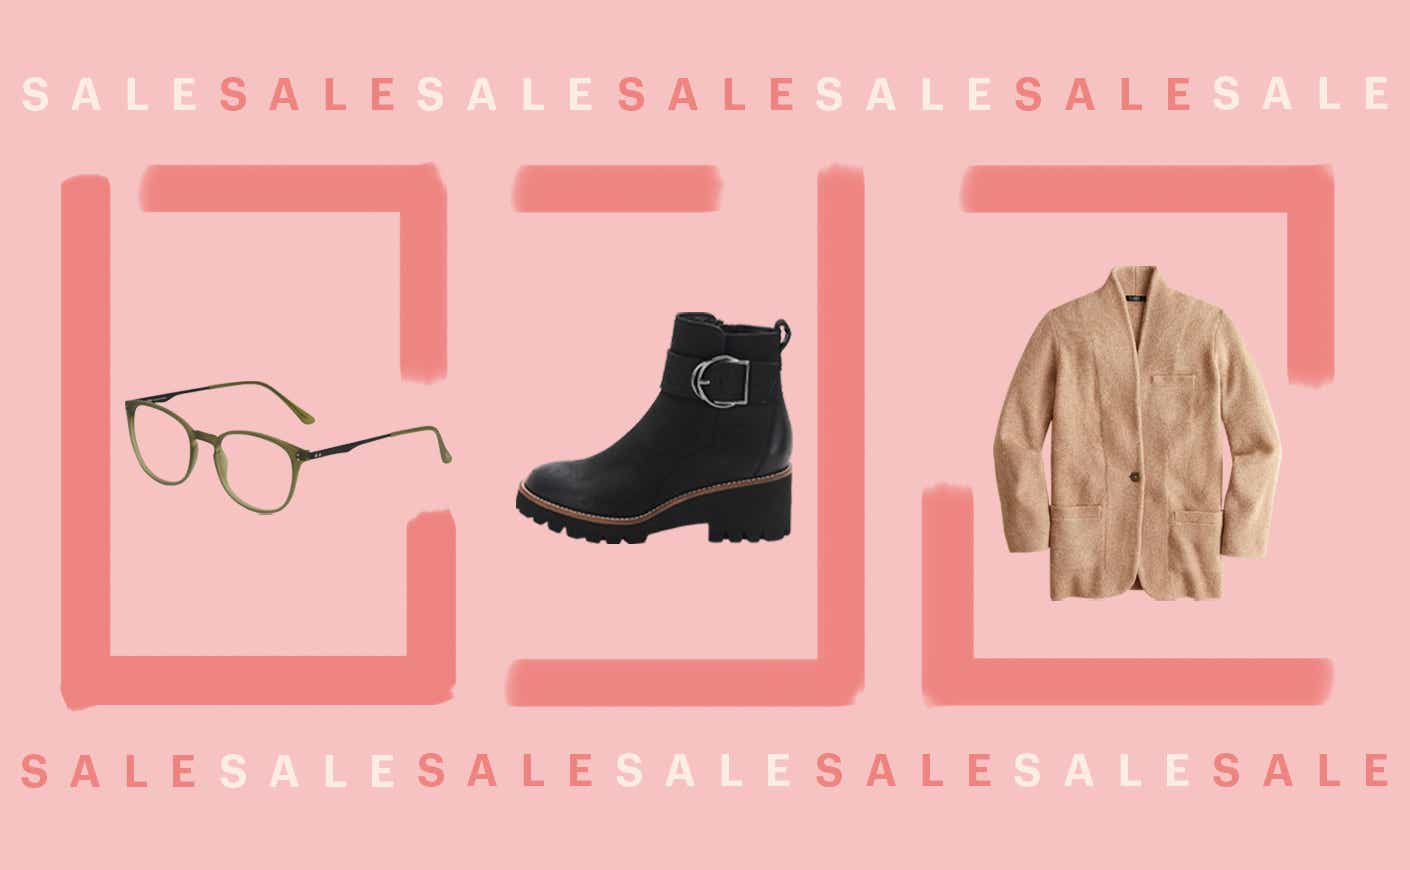 glasses, boots, and sweater on pink background with sale text on top and bottom